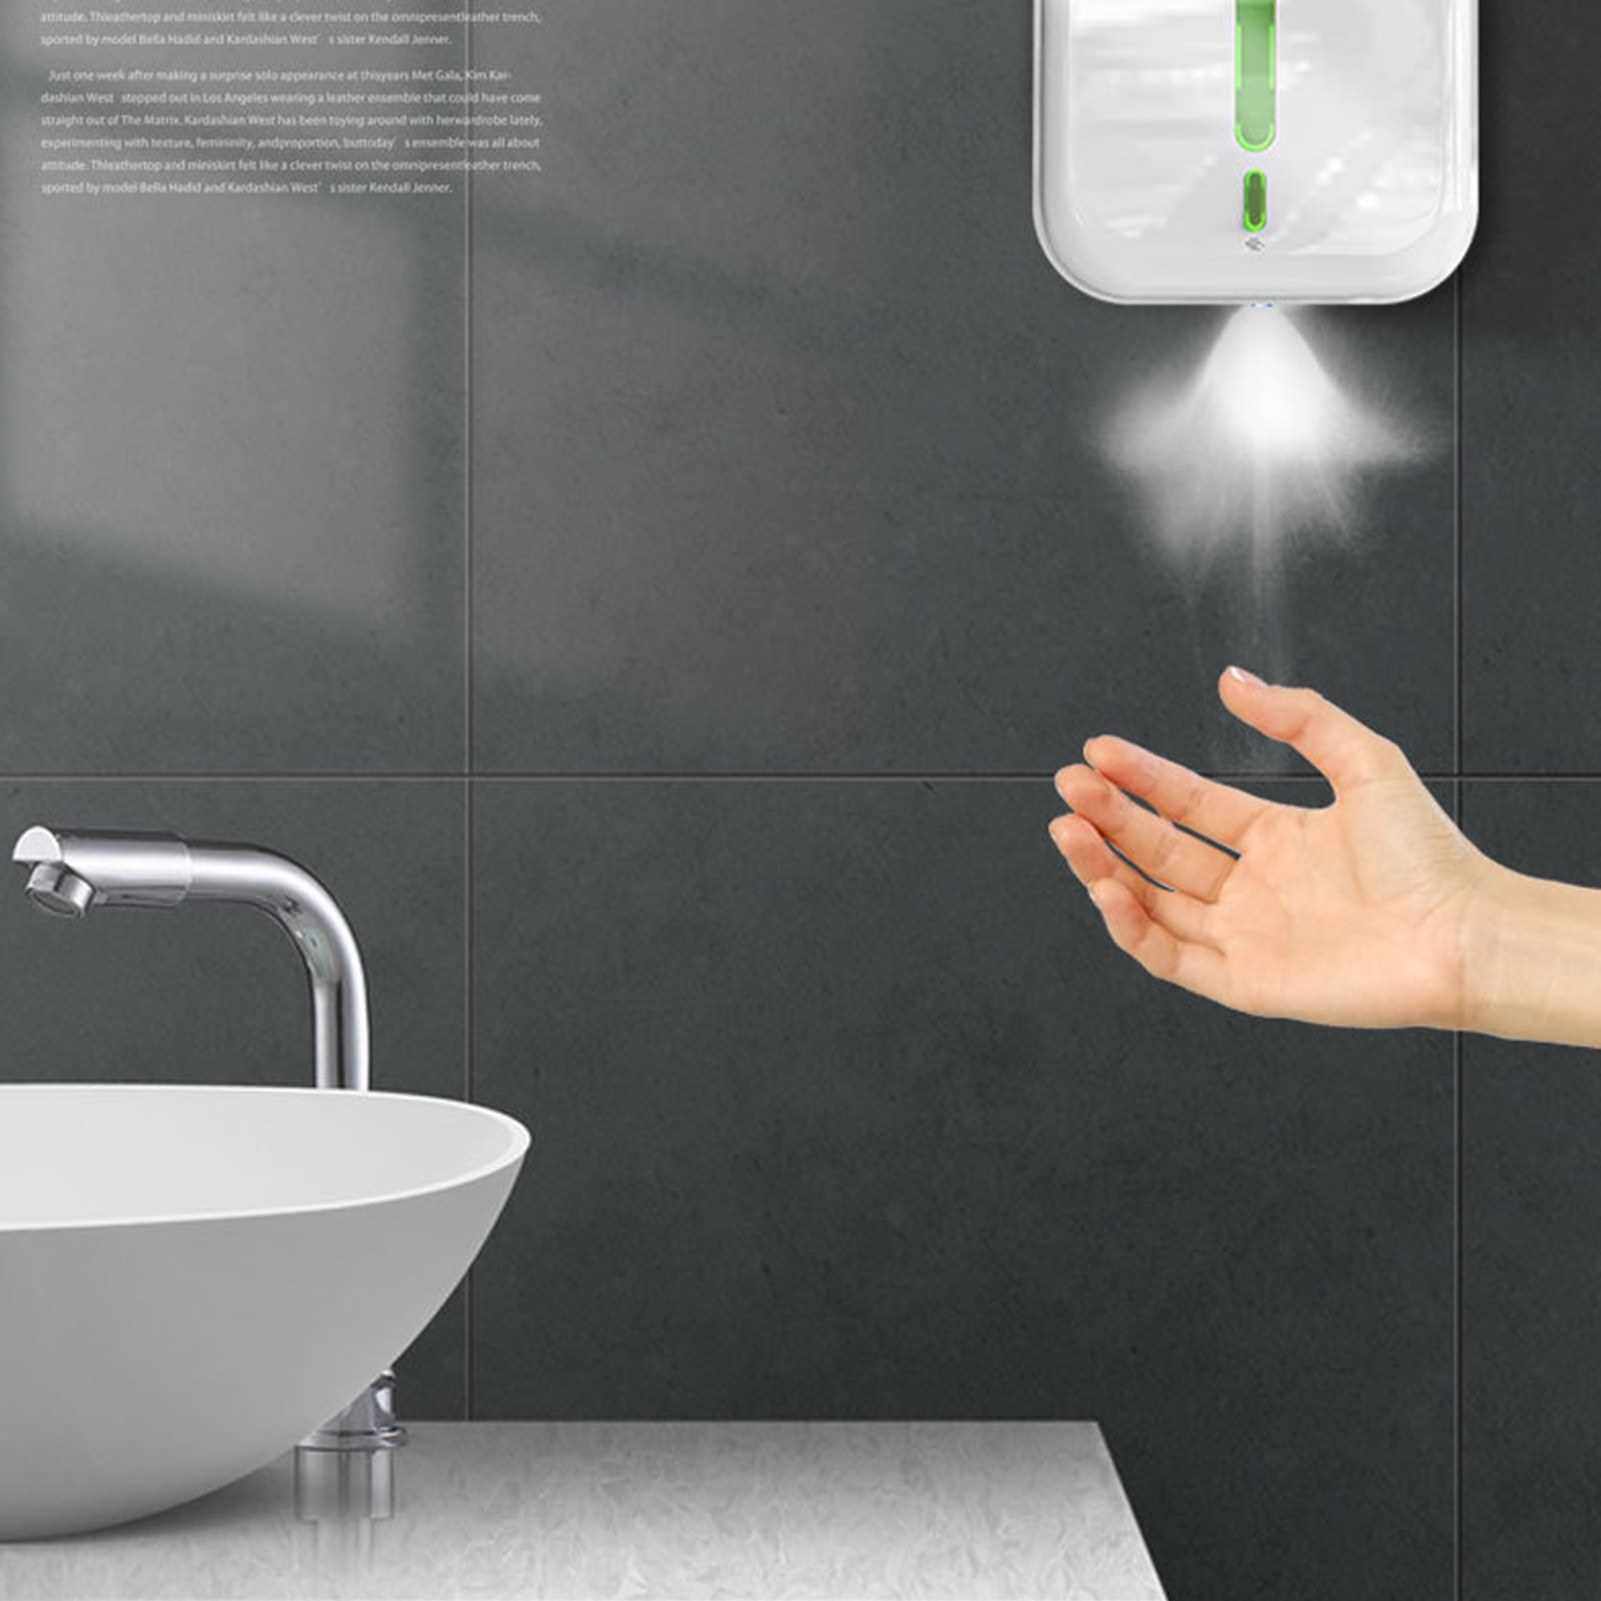 1500mL Automatic Soap Dispenser Drip Type Touchless Hand Sanitizer Machine with IR Sensor Nail-free Drilling Wall-Mounted for Home School Restaurant Office Commercial Use (Silver)